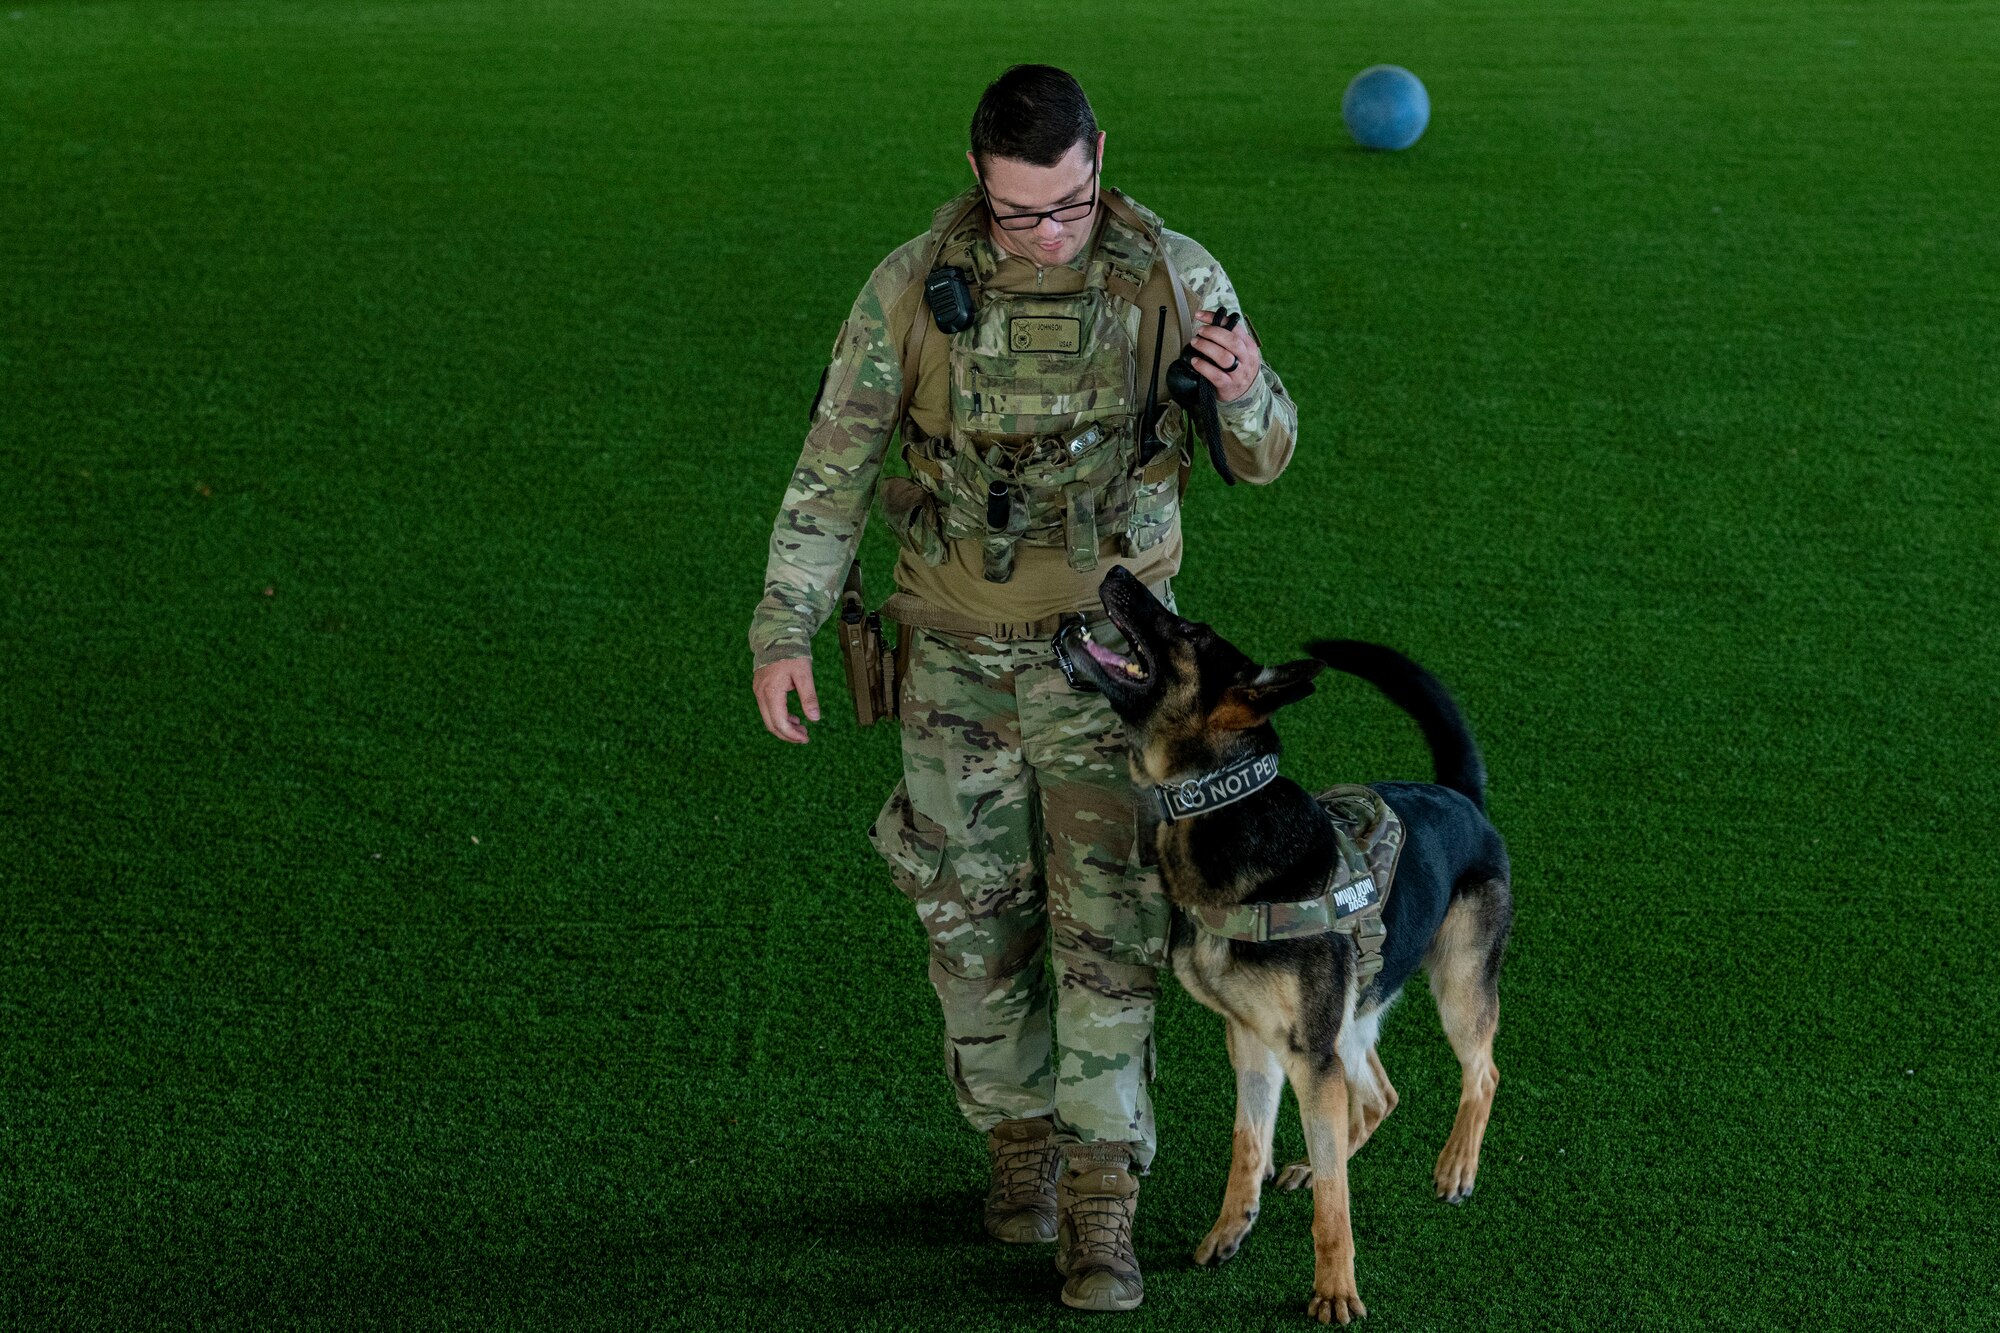 Staff Sgt. Kyle Johnson, 4th Security Forces Squadron military working dog handler, performs obedience training with MWD Donni at Seymour Johnson Air Force Base, North Carolina, July 6, 2022. MWD handlers are responsible for forming a relationship with their MWD to ensure trust and ability to follow commands. (U.S. Air Force photo by Airman 1st Class Sabrina Fuller)